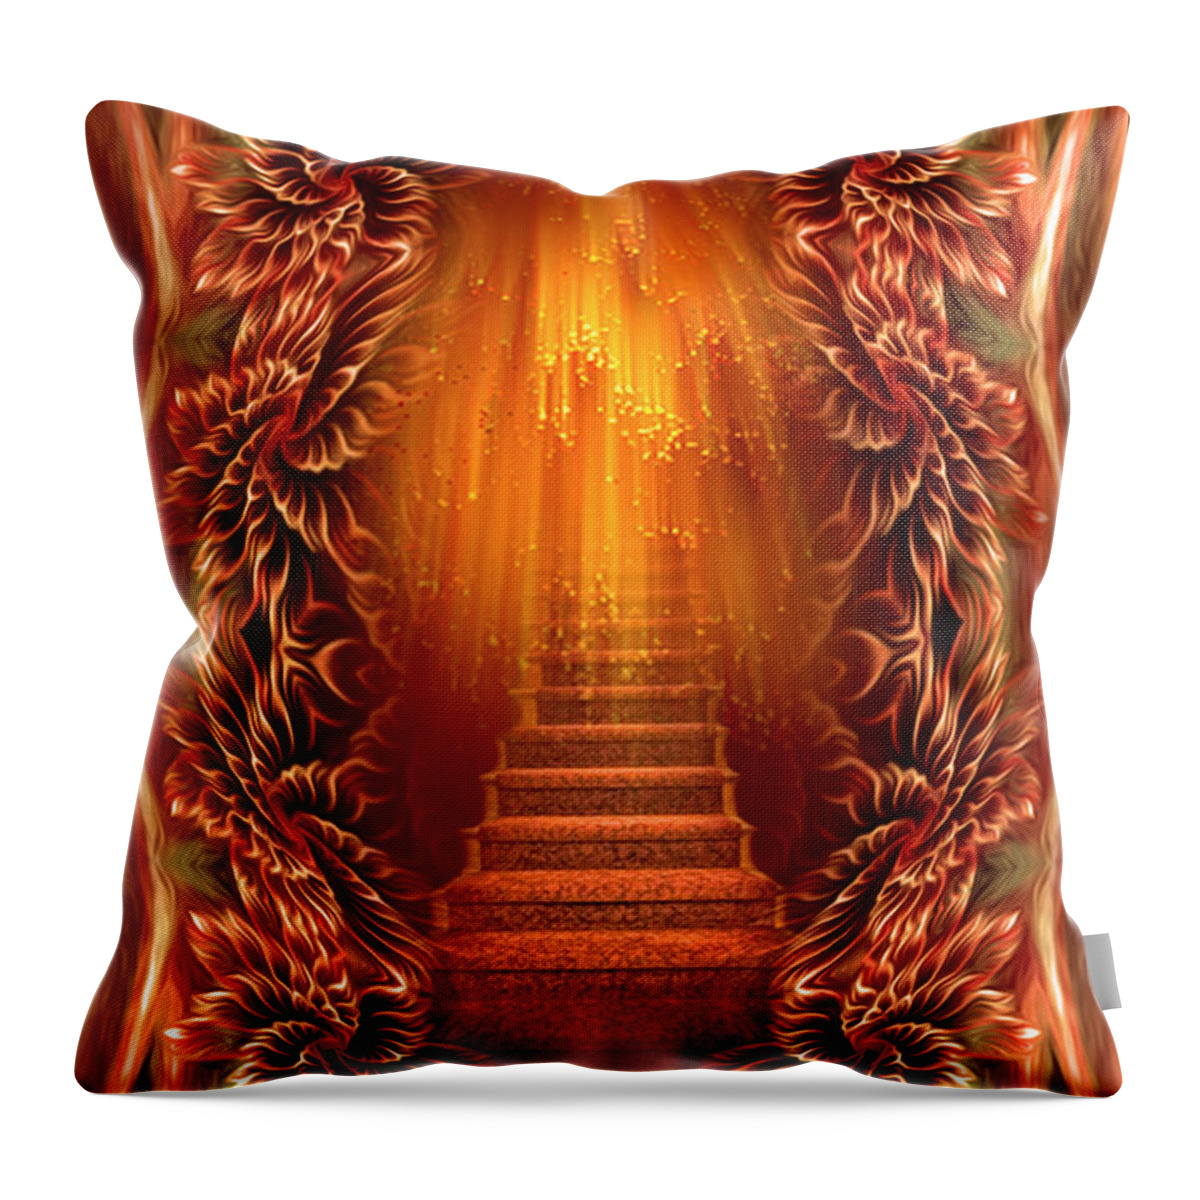 Aglimpseofheaven Throw Pillow featuring the digital art A glimpse of heaven - soothing art by Giada Rossi by Giada Rossi